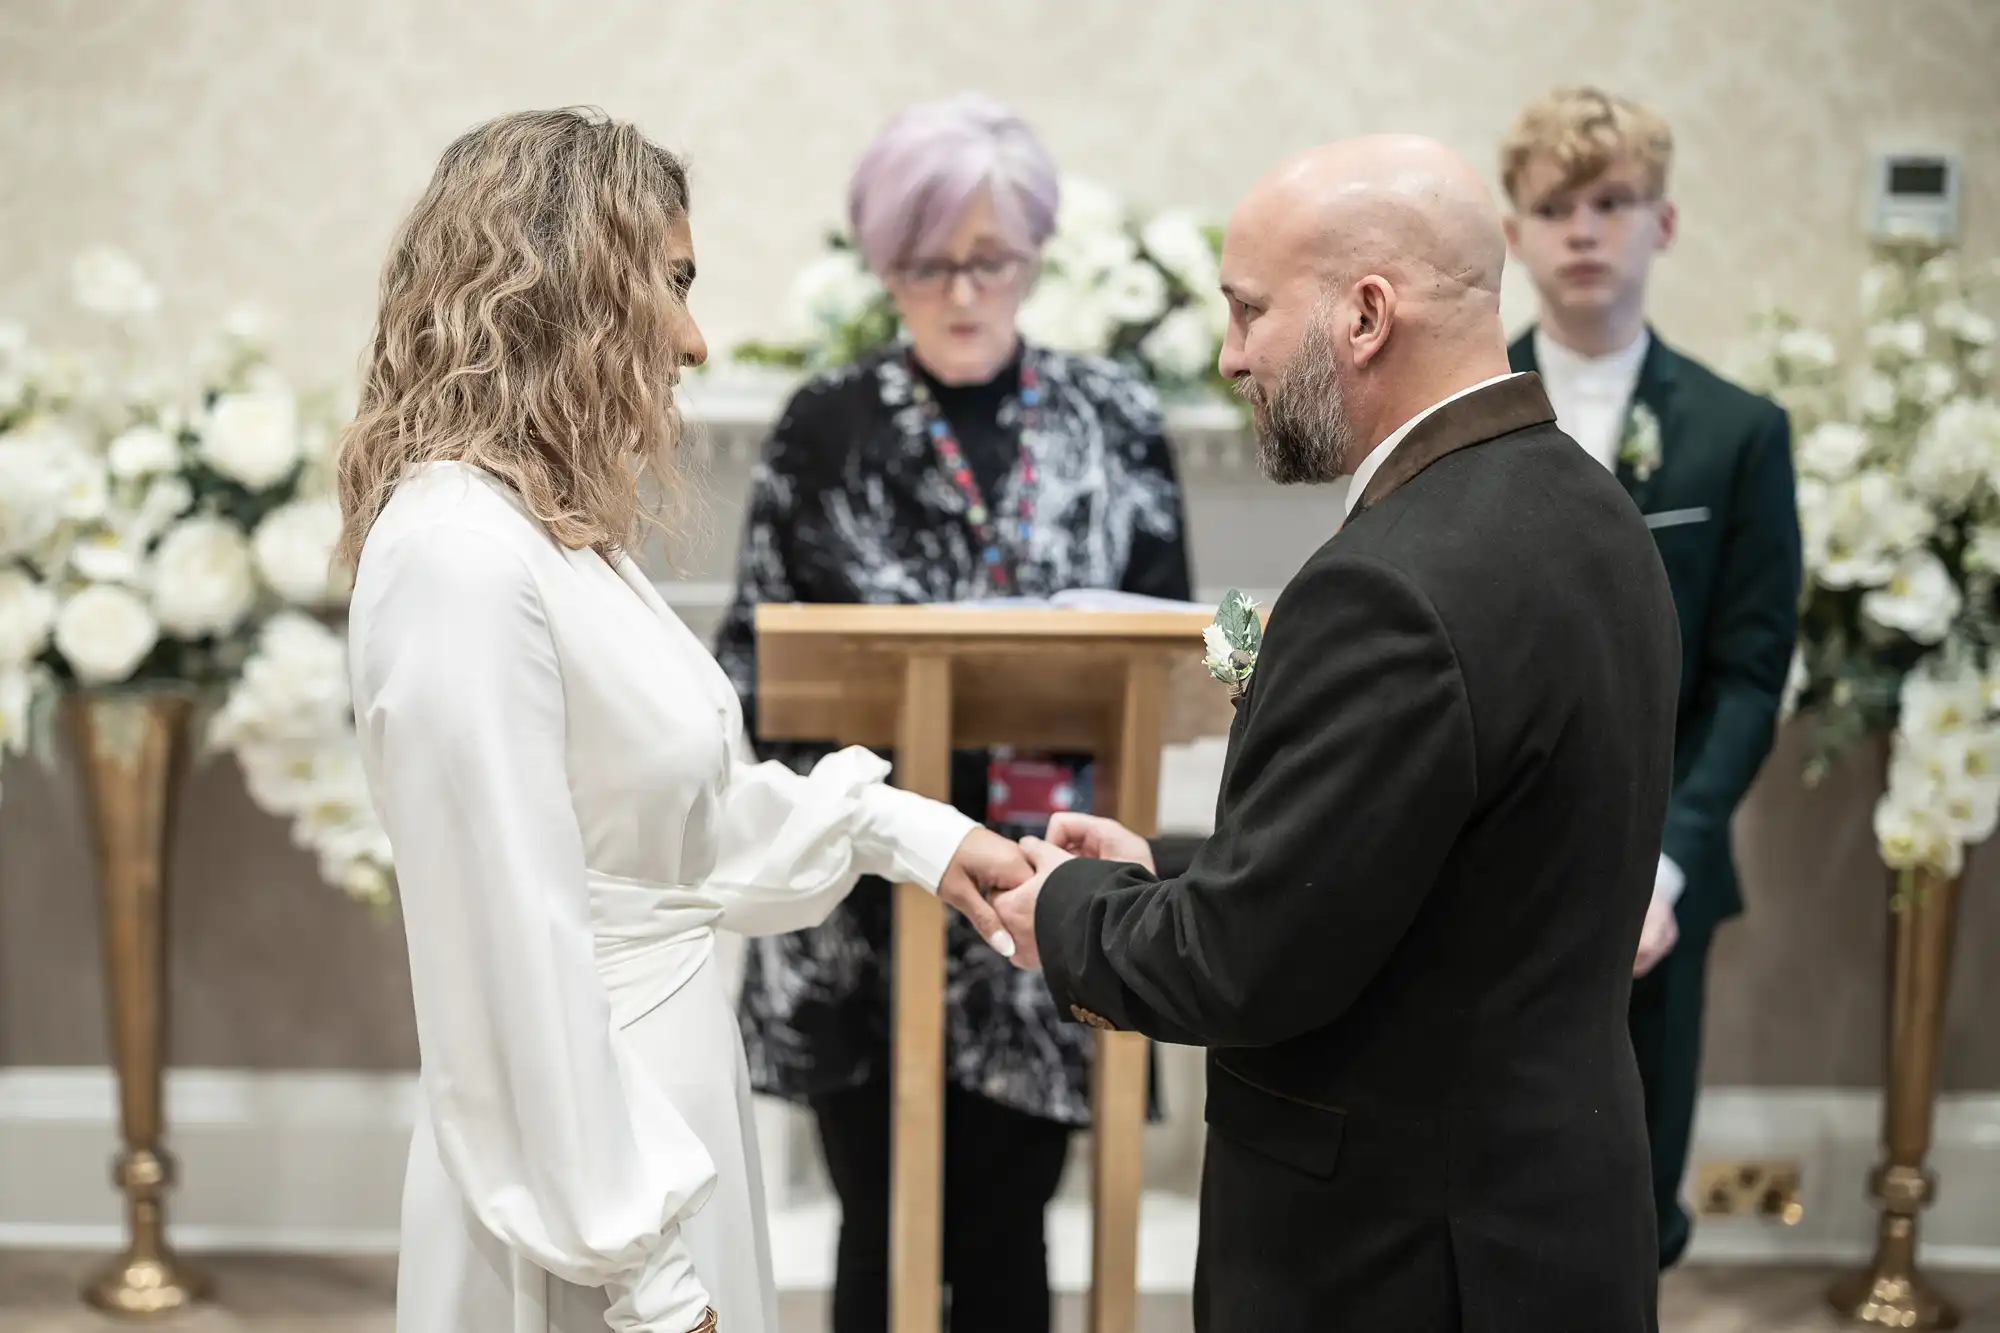 A couple exchanges rings during a wedding ceremony officiated by a person standing at a podium. White floral decorations are in the background. A young person is standing in the background.